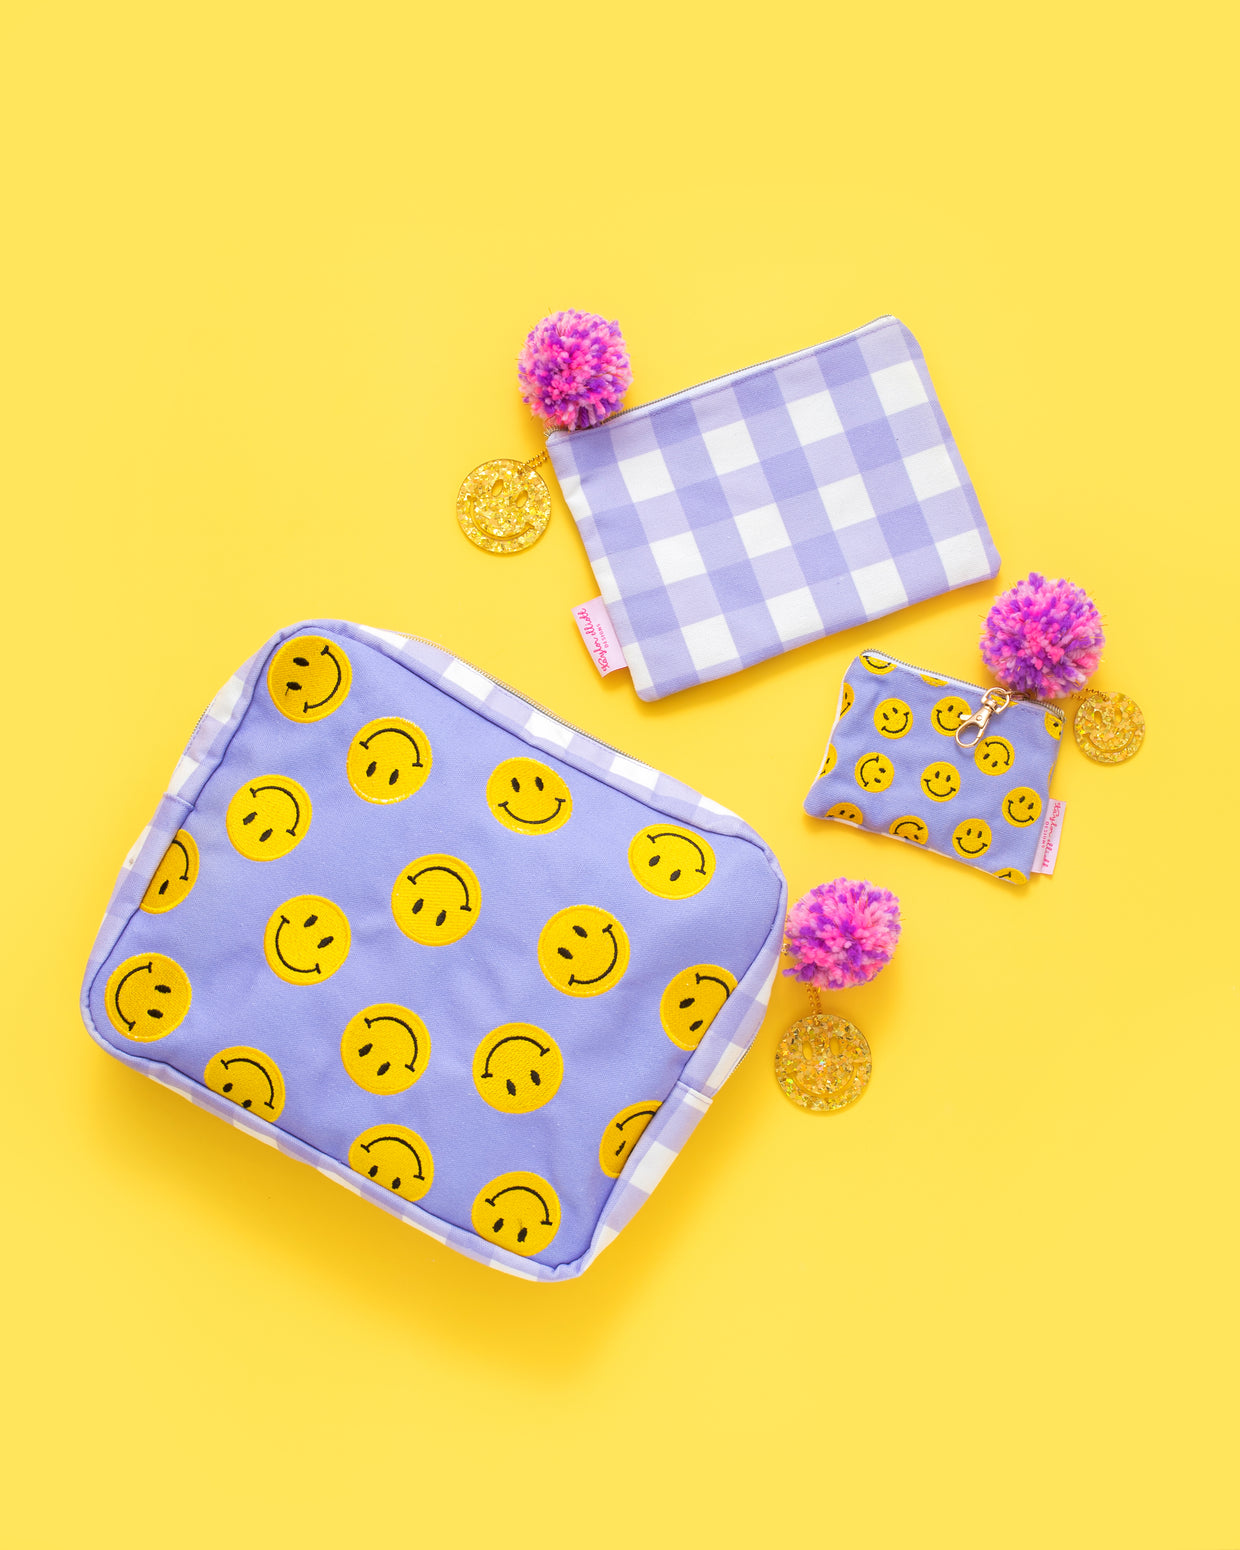 Smiley Cardholder Keychain Pouch